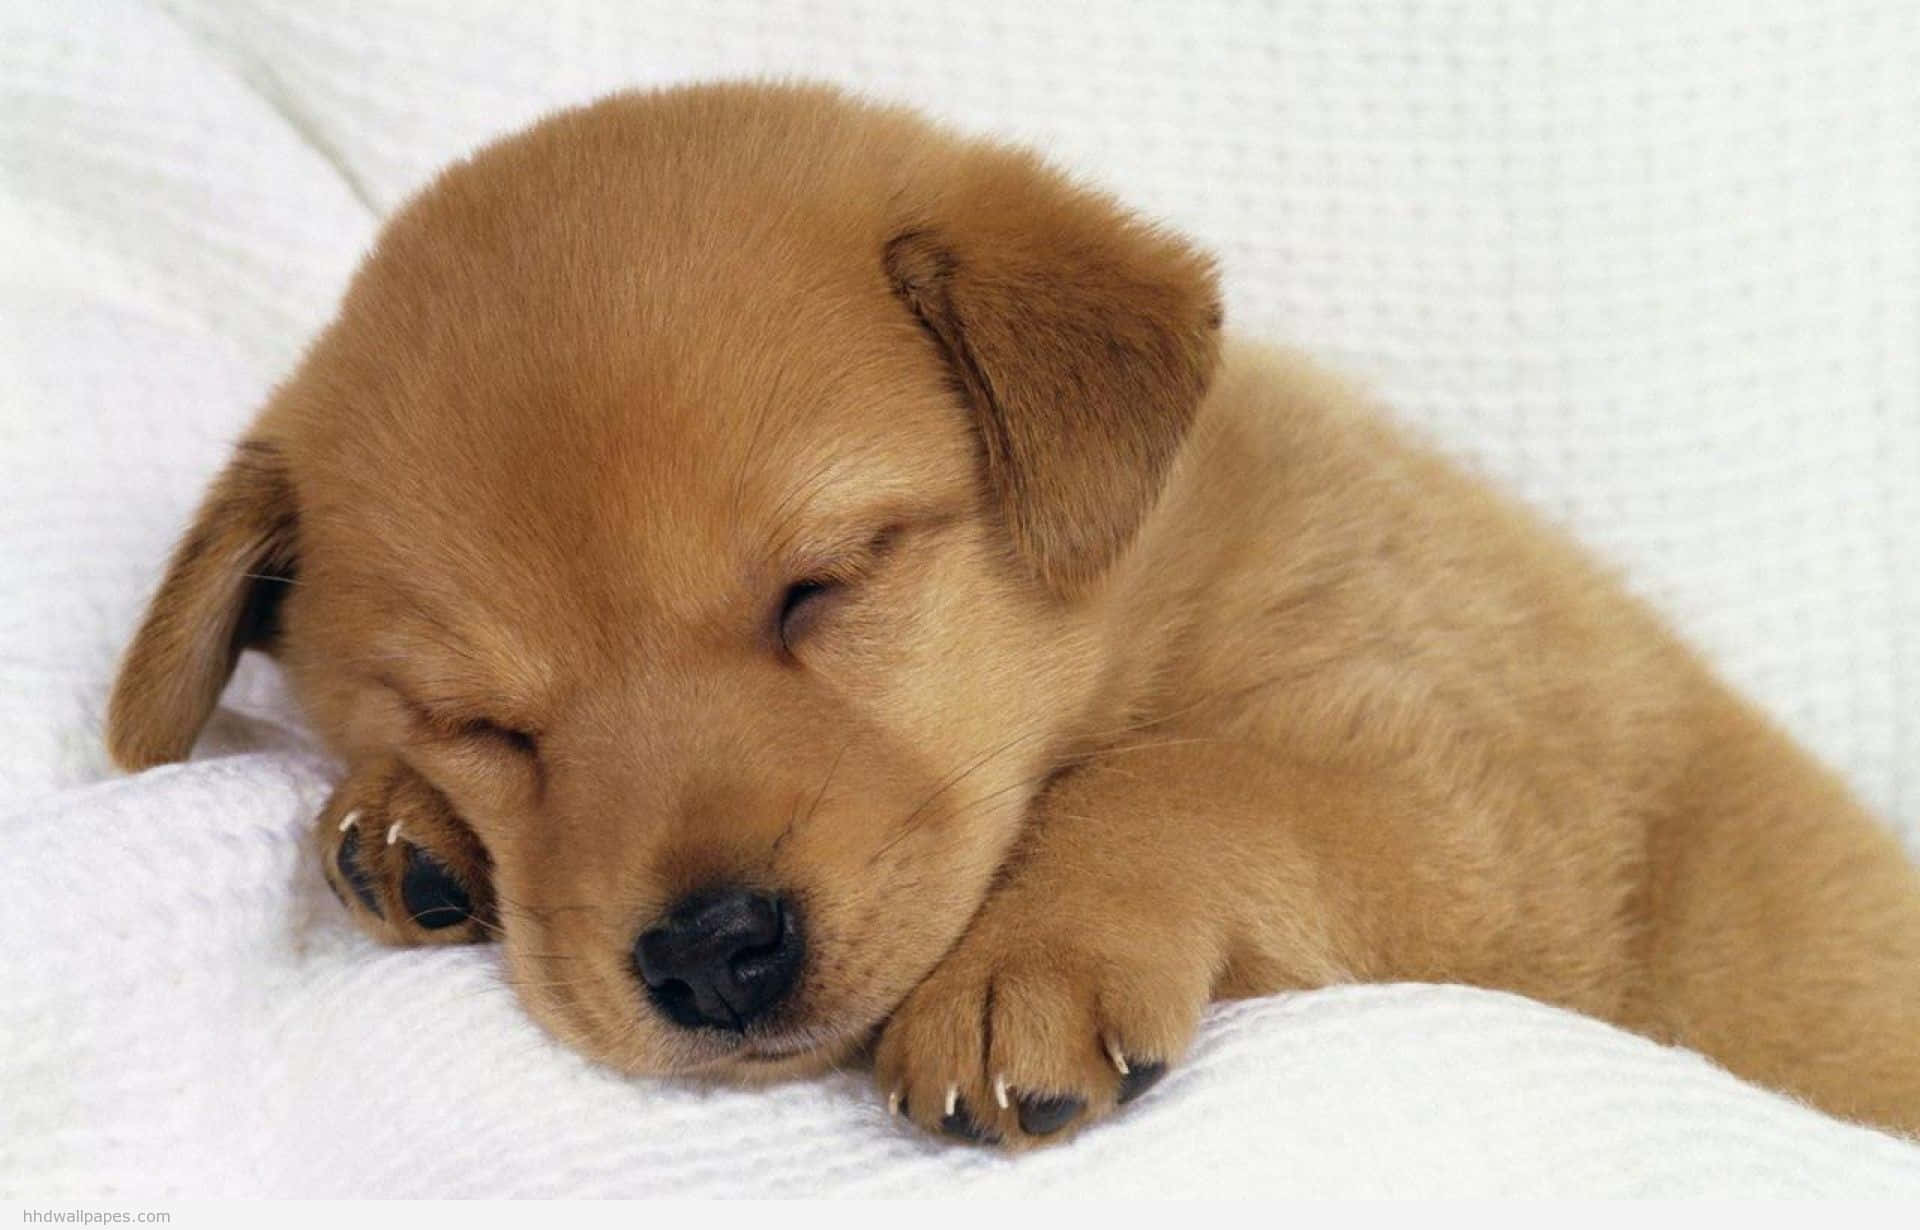 A Brown Puppy Sleeping On A White Blanket